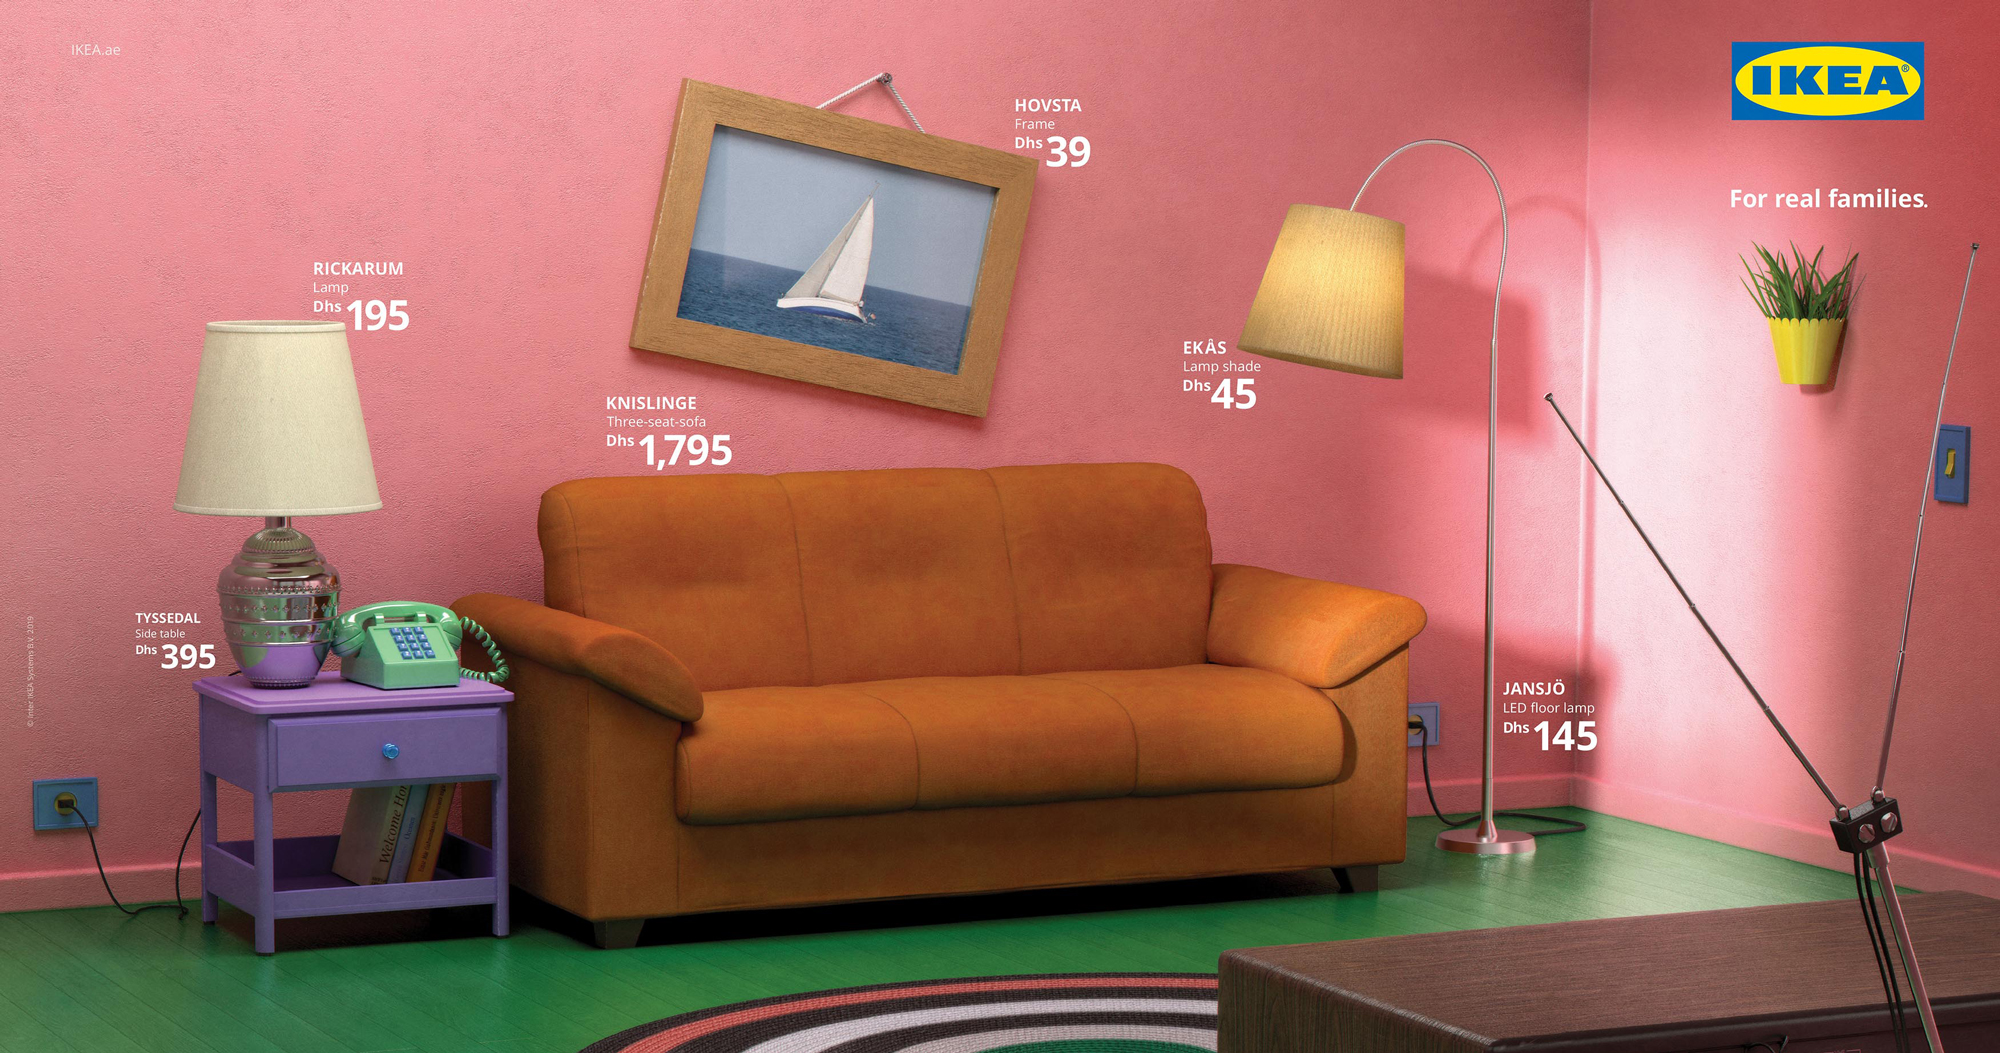 Ikea Recreated The Simpsons Couch Friends Apartment And Stranger